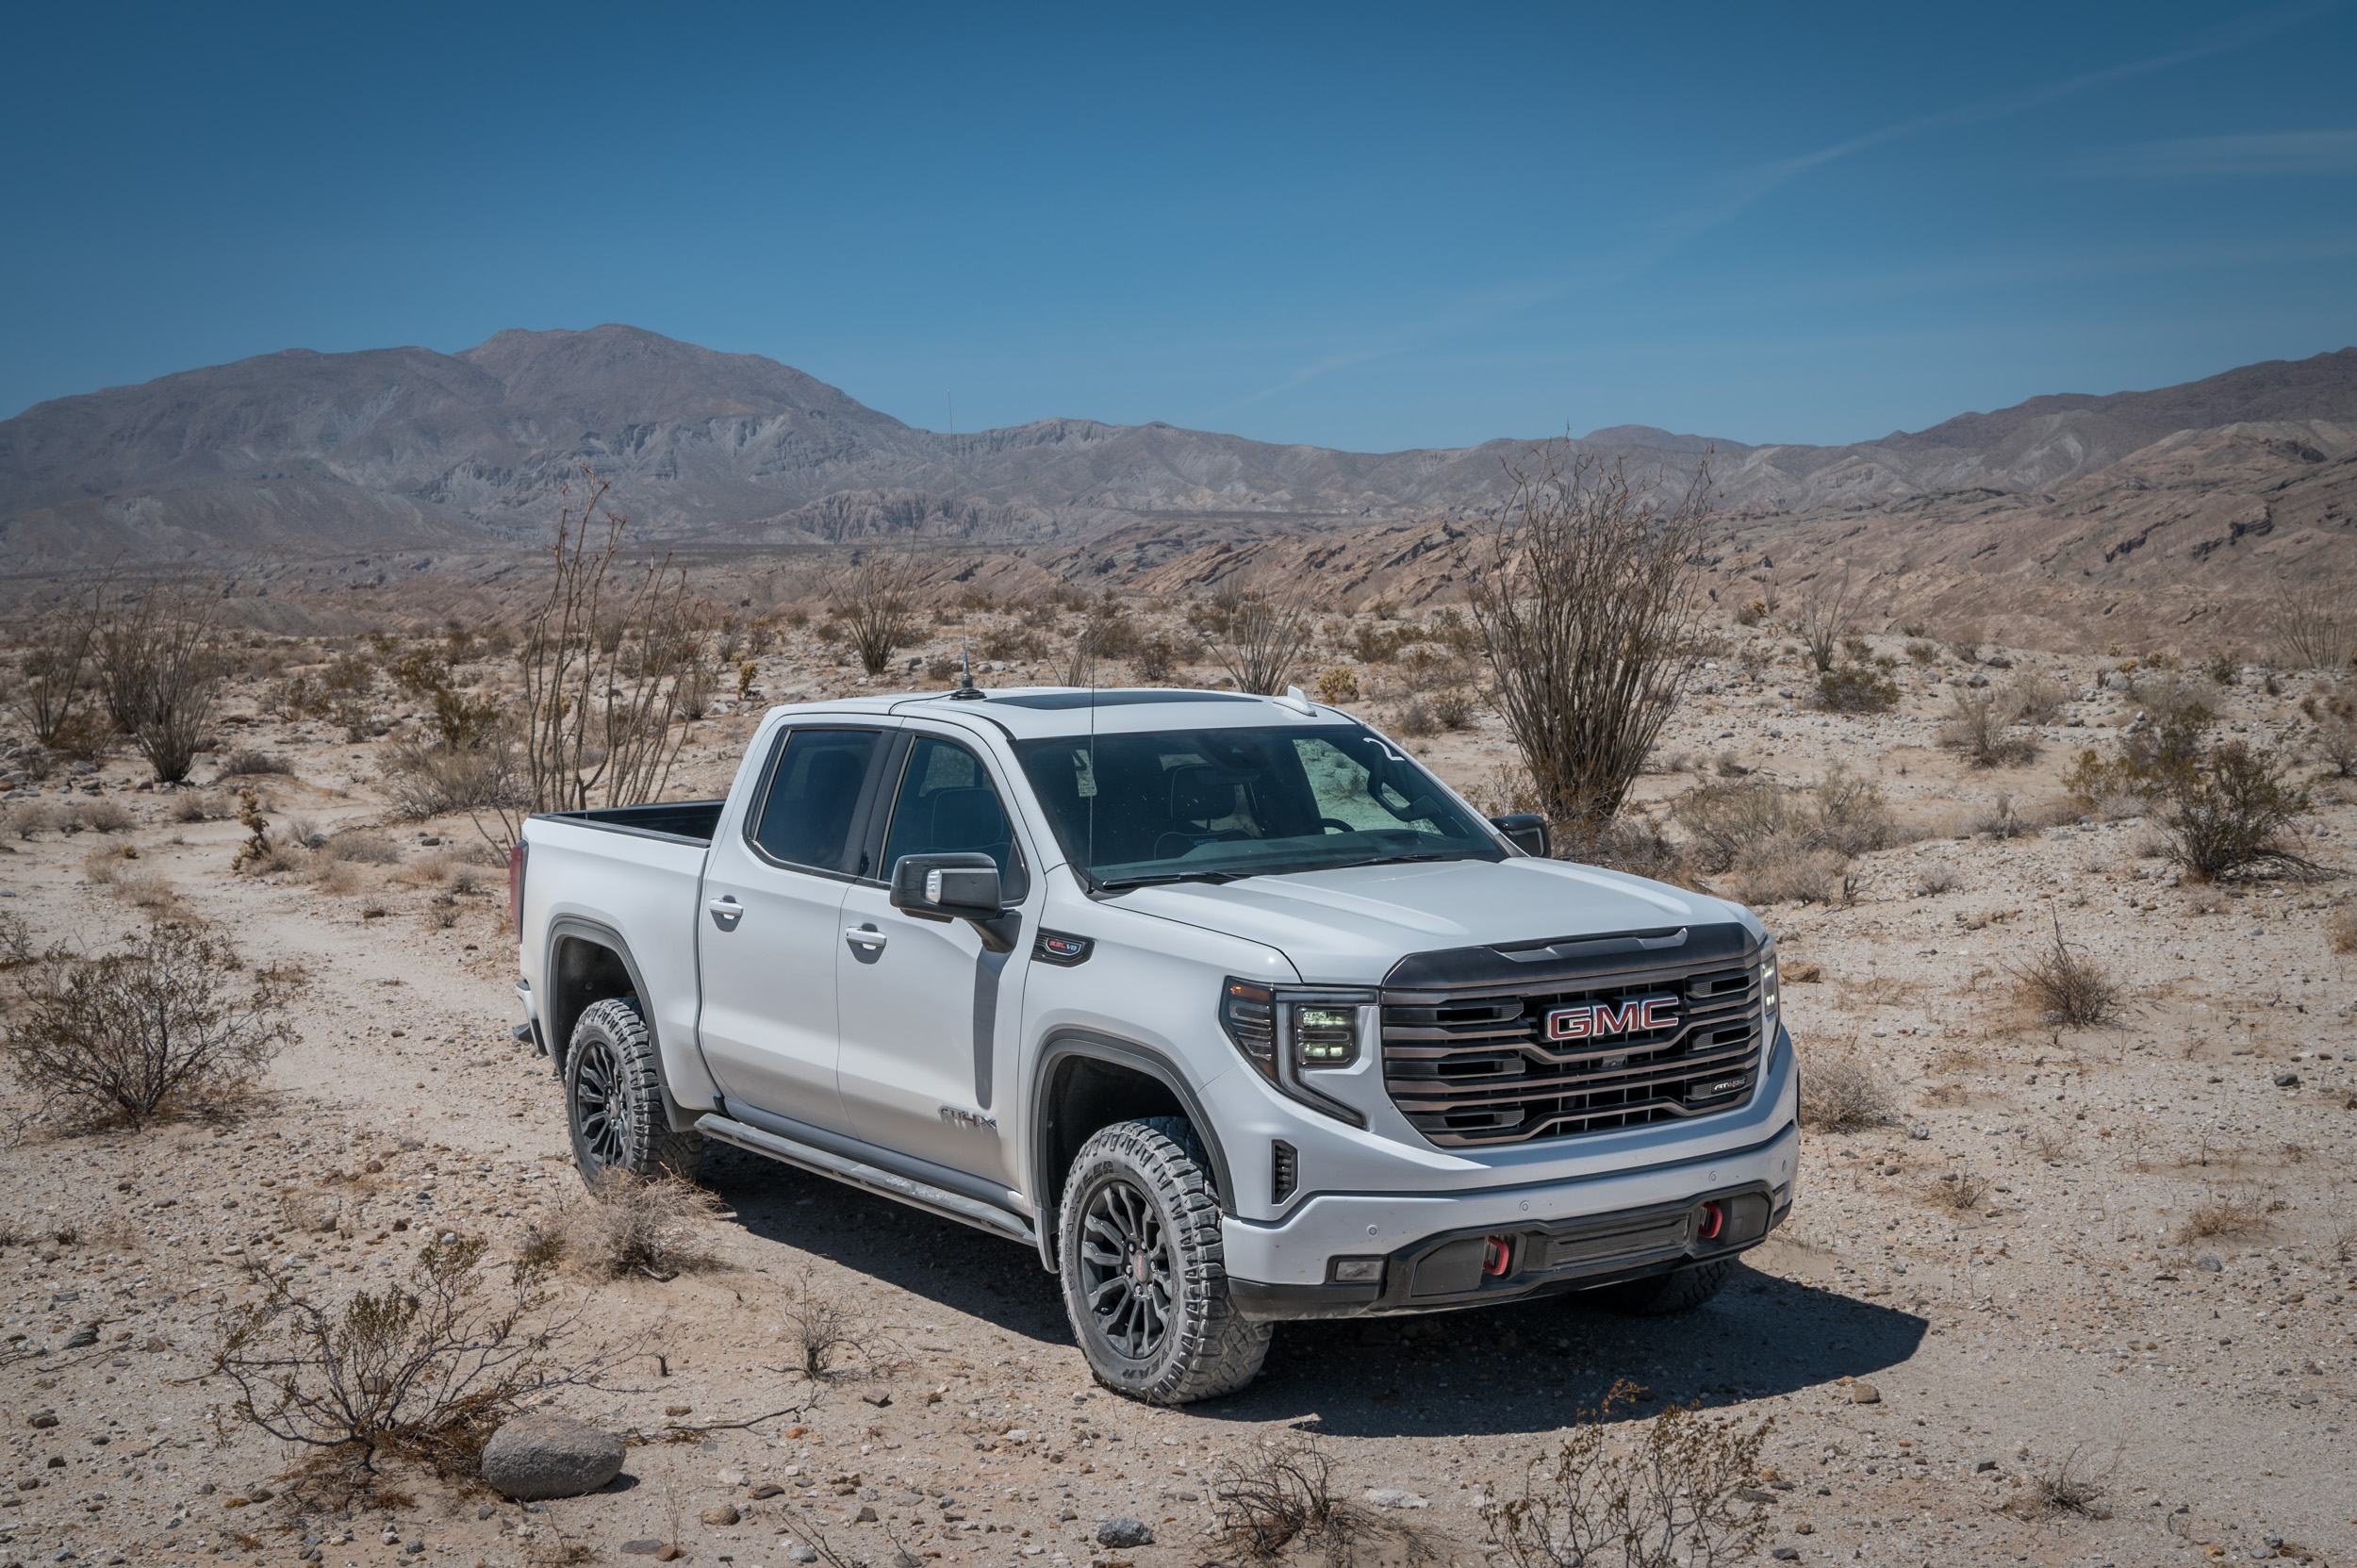 2022 GMC Sierra 1500 AT4X Review: What We Love (And Don't) | GearJunkie